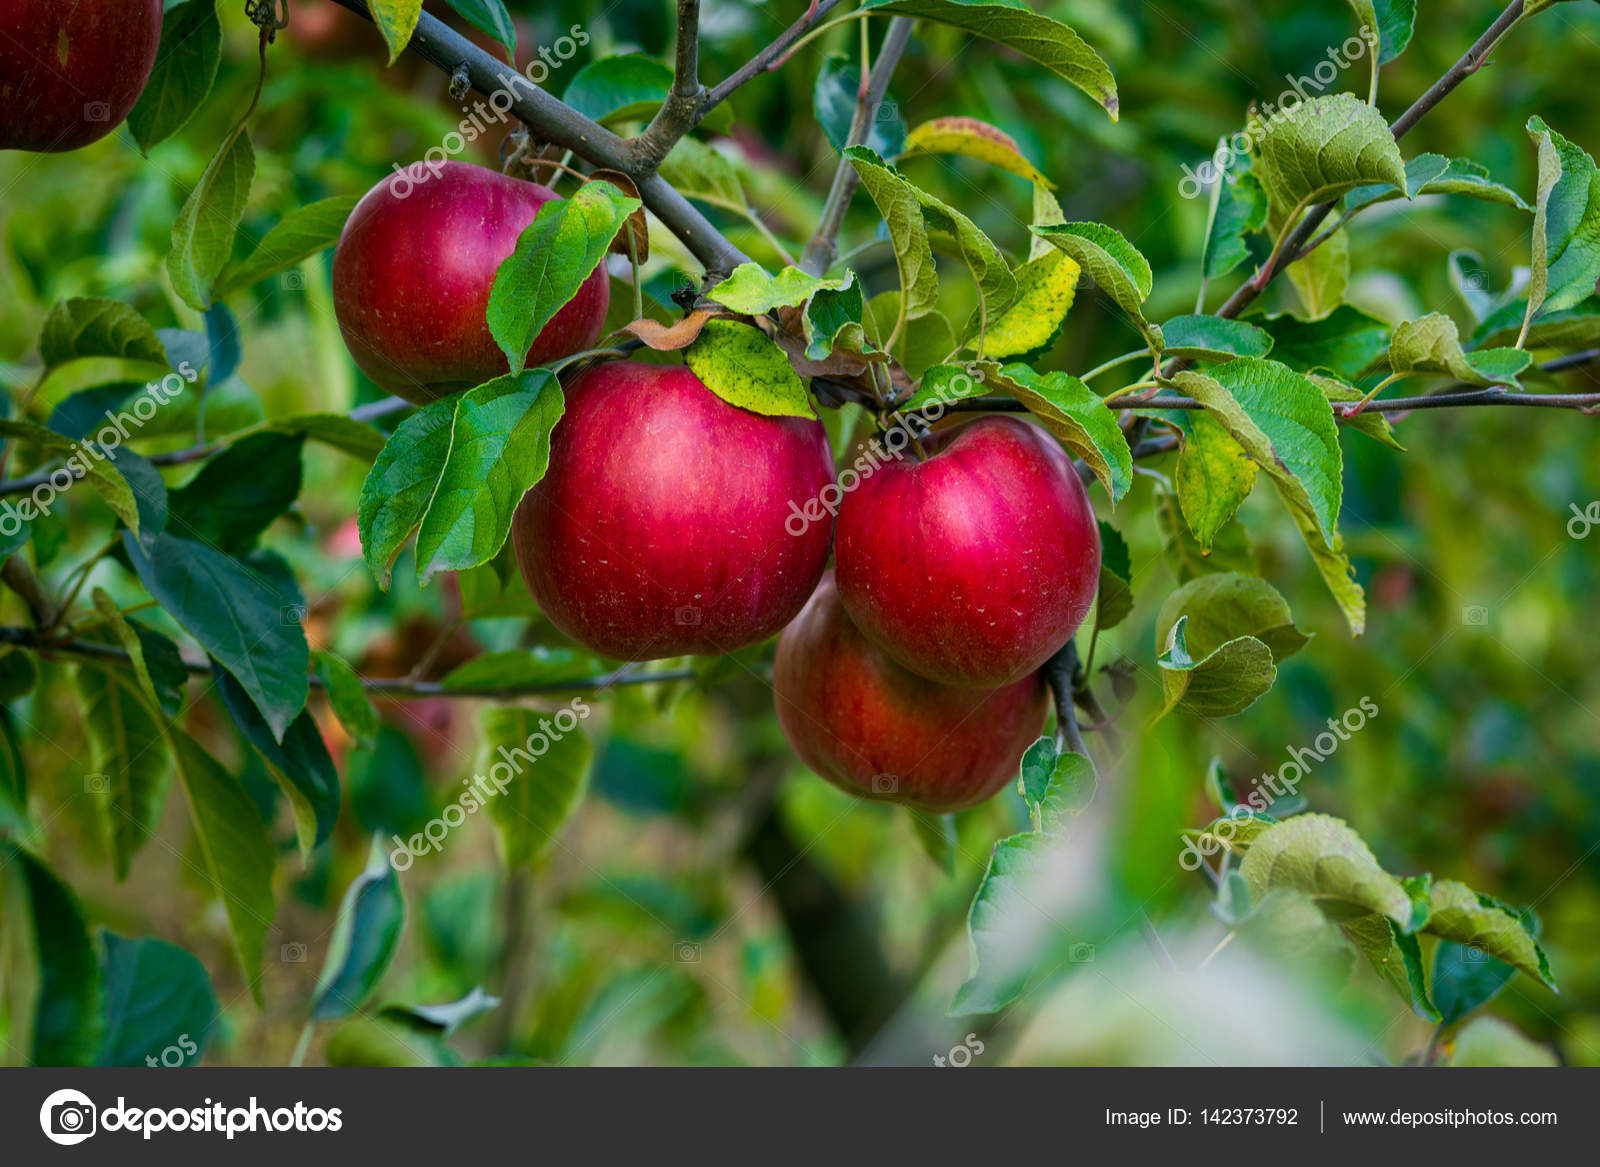 Fresh Organic Apples,apple orchard,Apple garden full of riped red apples, apples for juice,Organic red apples hanging on a tree branch,apple trees in  a row, before harvest Stock Photo by ©bondvit 142373792